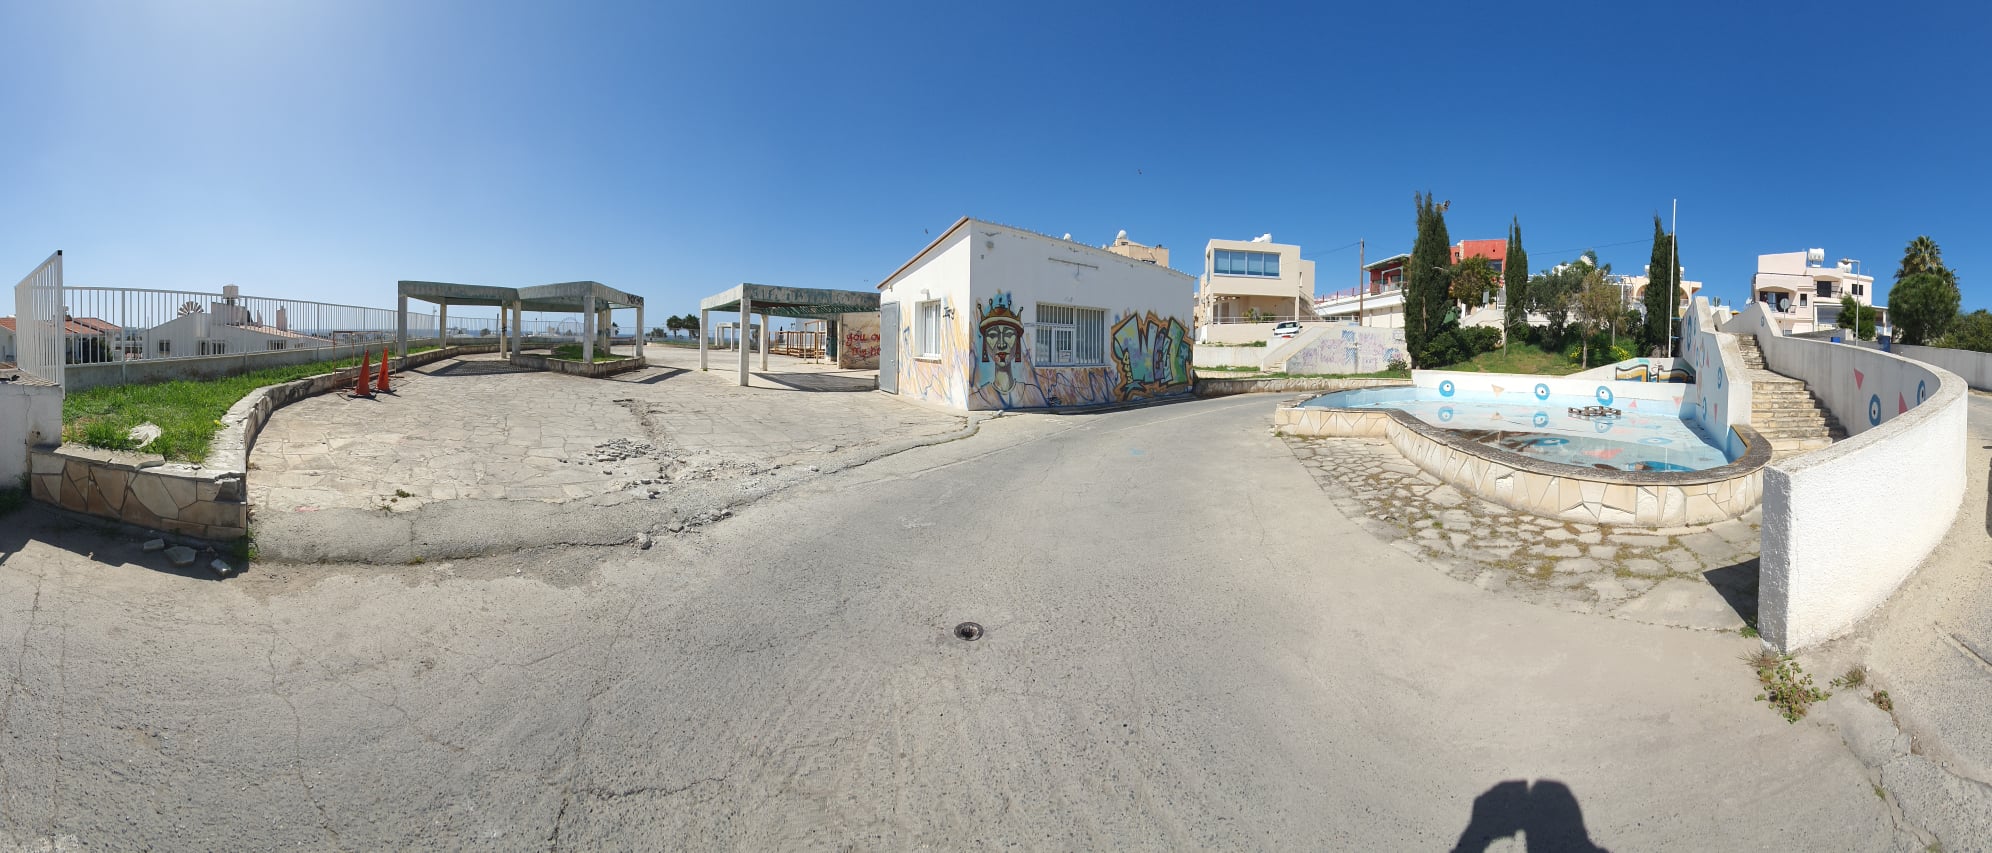 168682000 297917518356160 8657126595664149250 n exclusive, Municipality of Ayia Napa, REFERENCE POINT